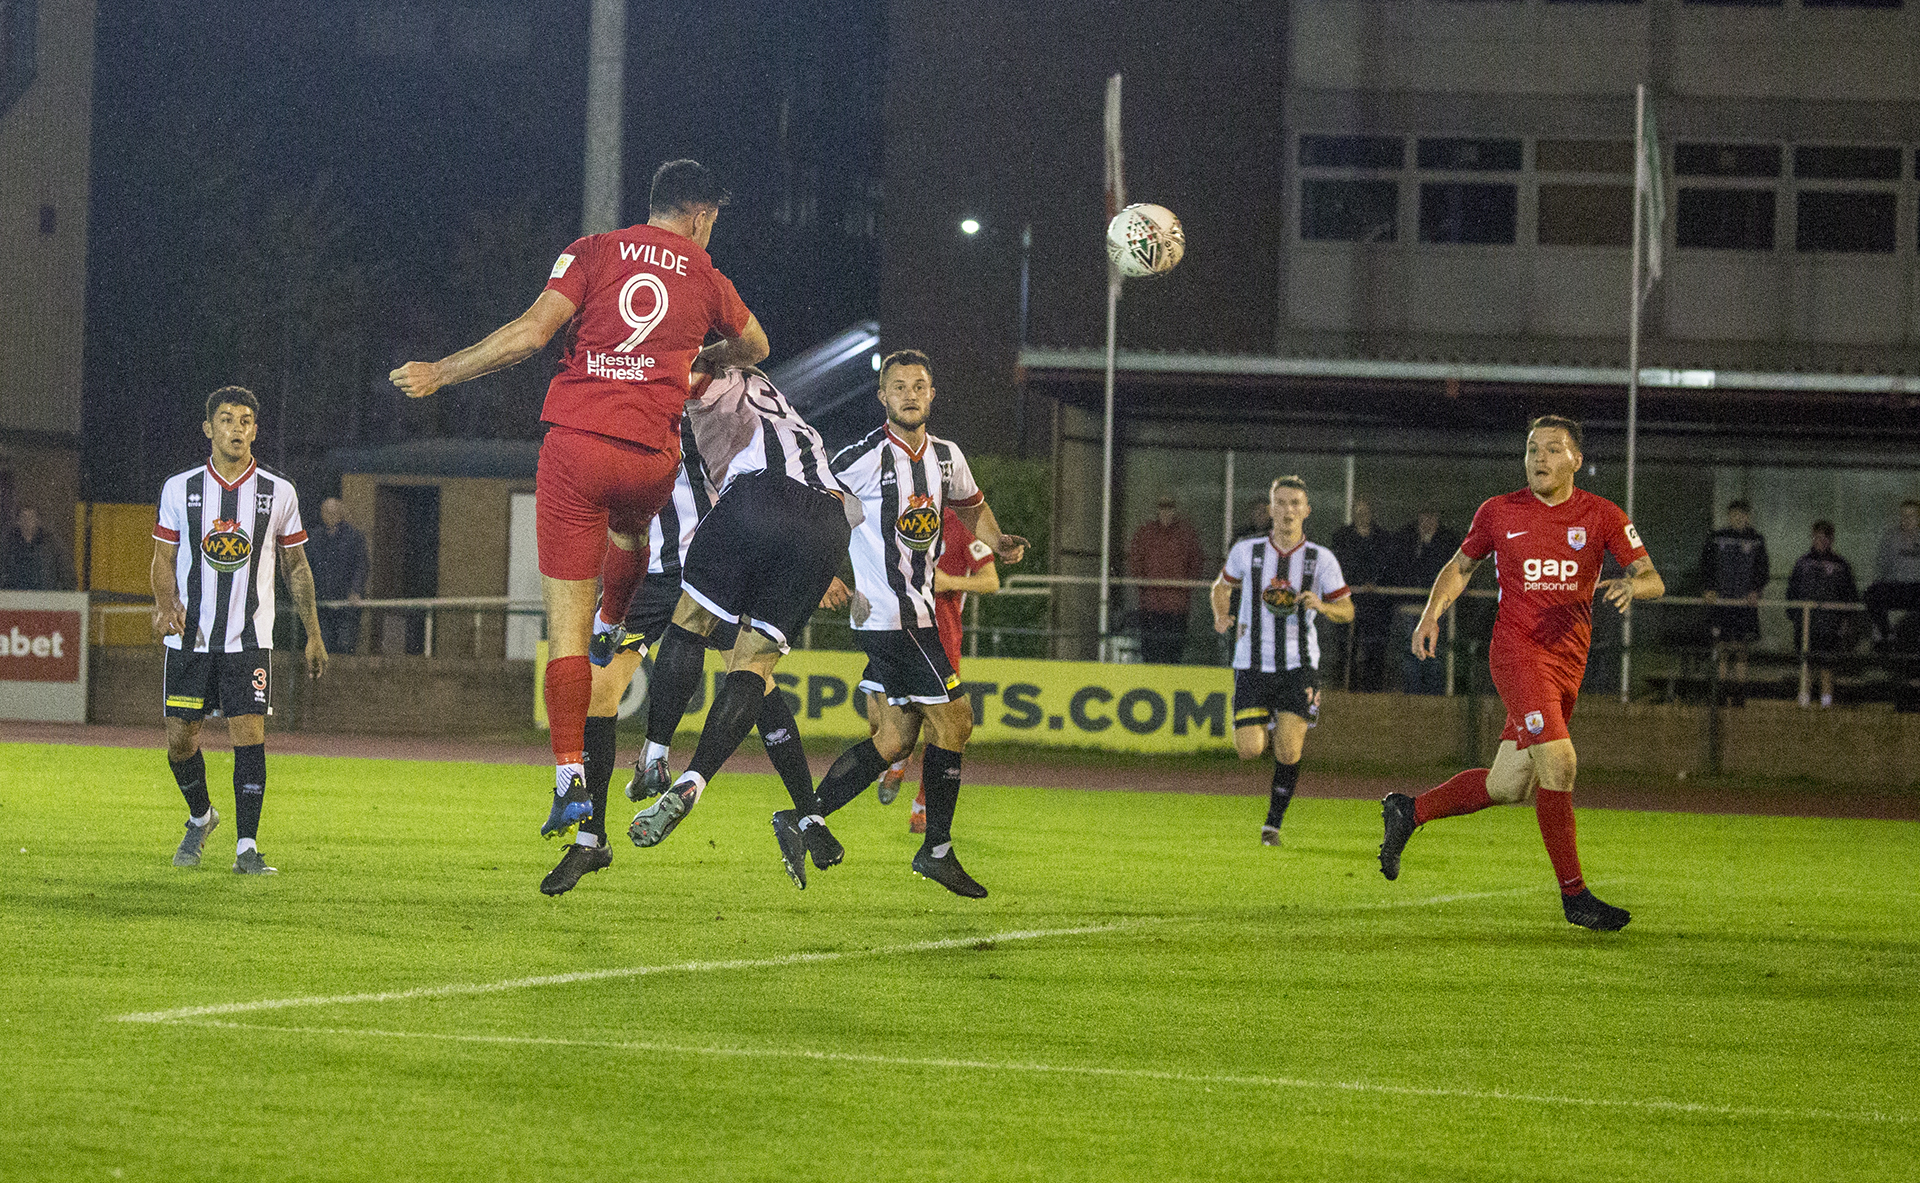 Michael Wilde's second half header was ruled out for offside | © NCM Media